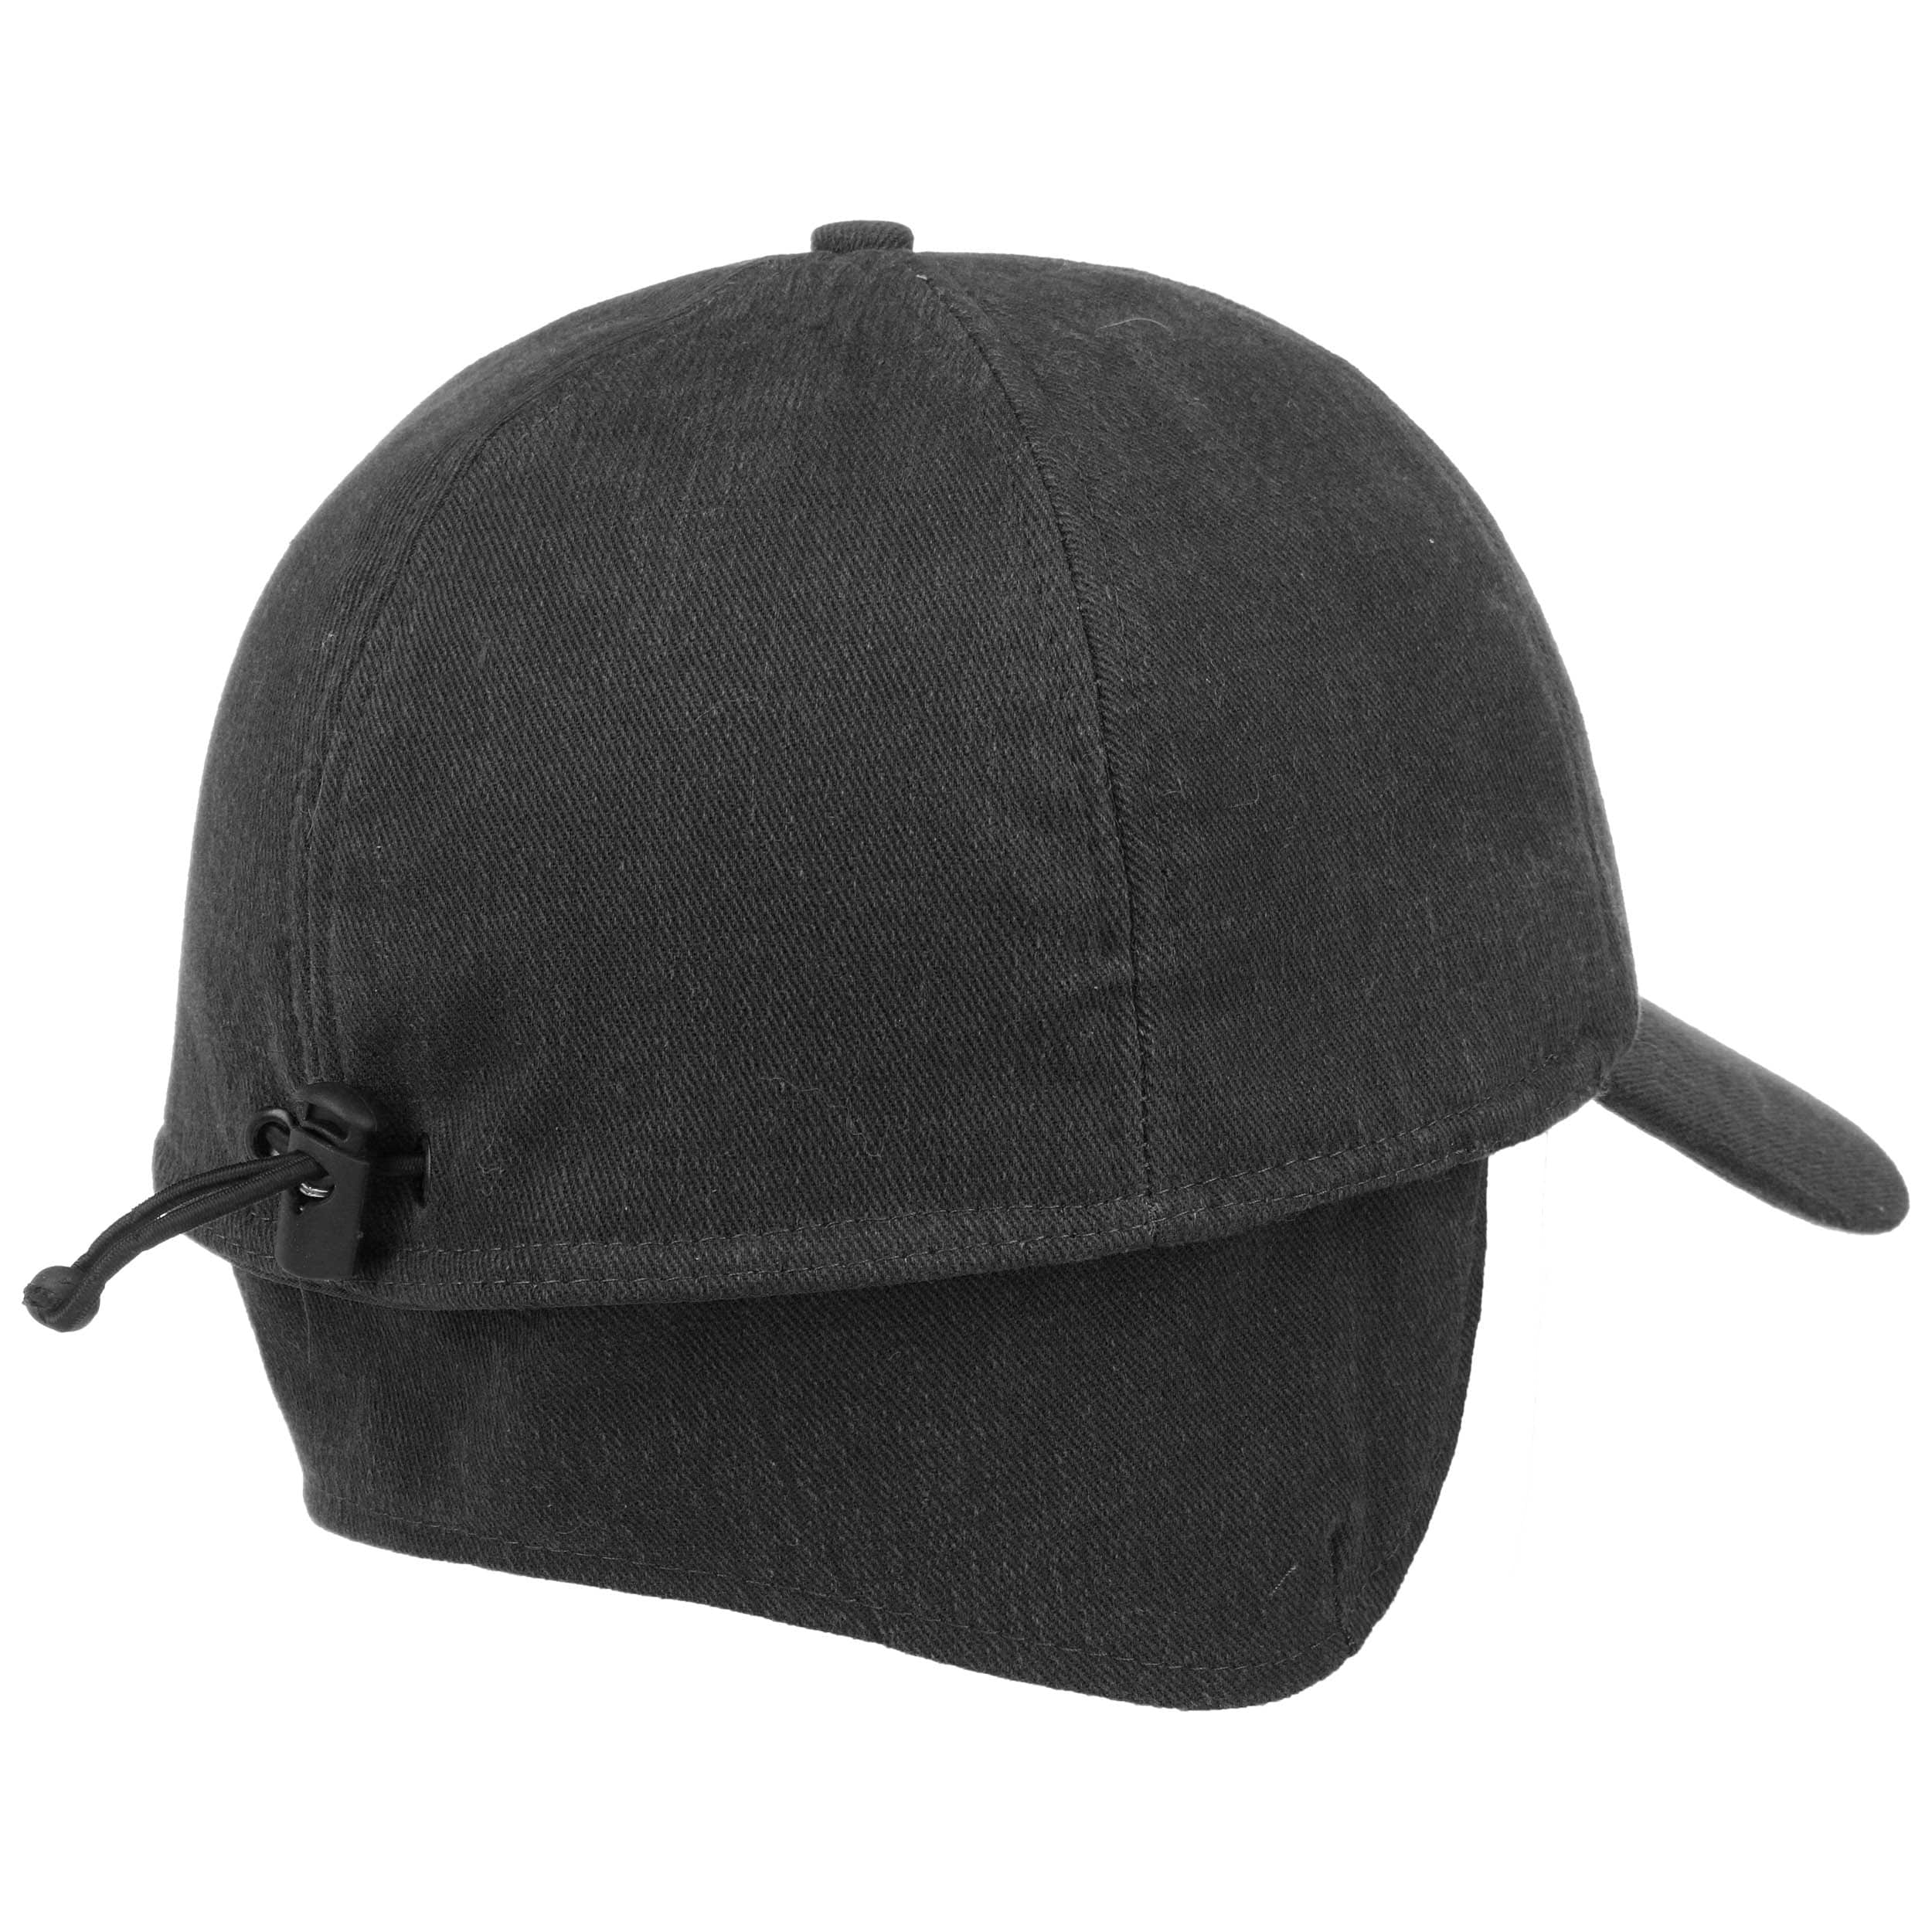 € Thinsulate Cap by mit Lipodo 24,95 Ohrenklappen -